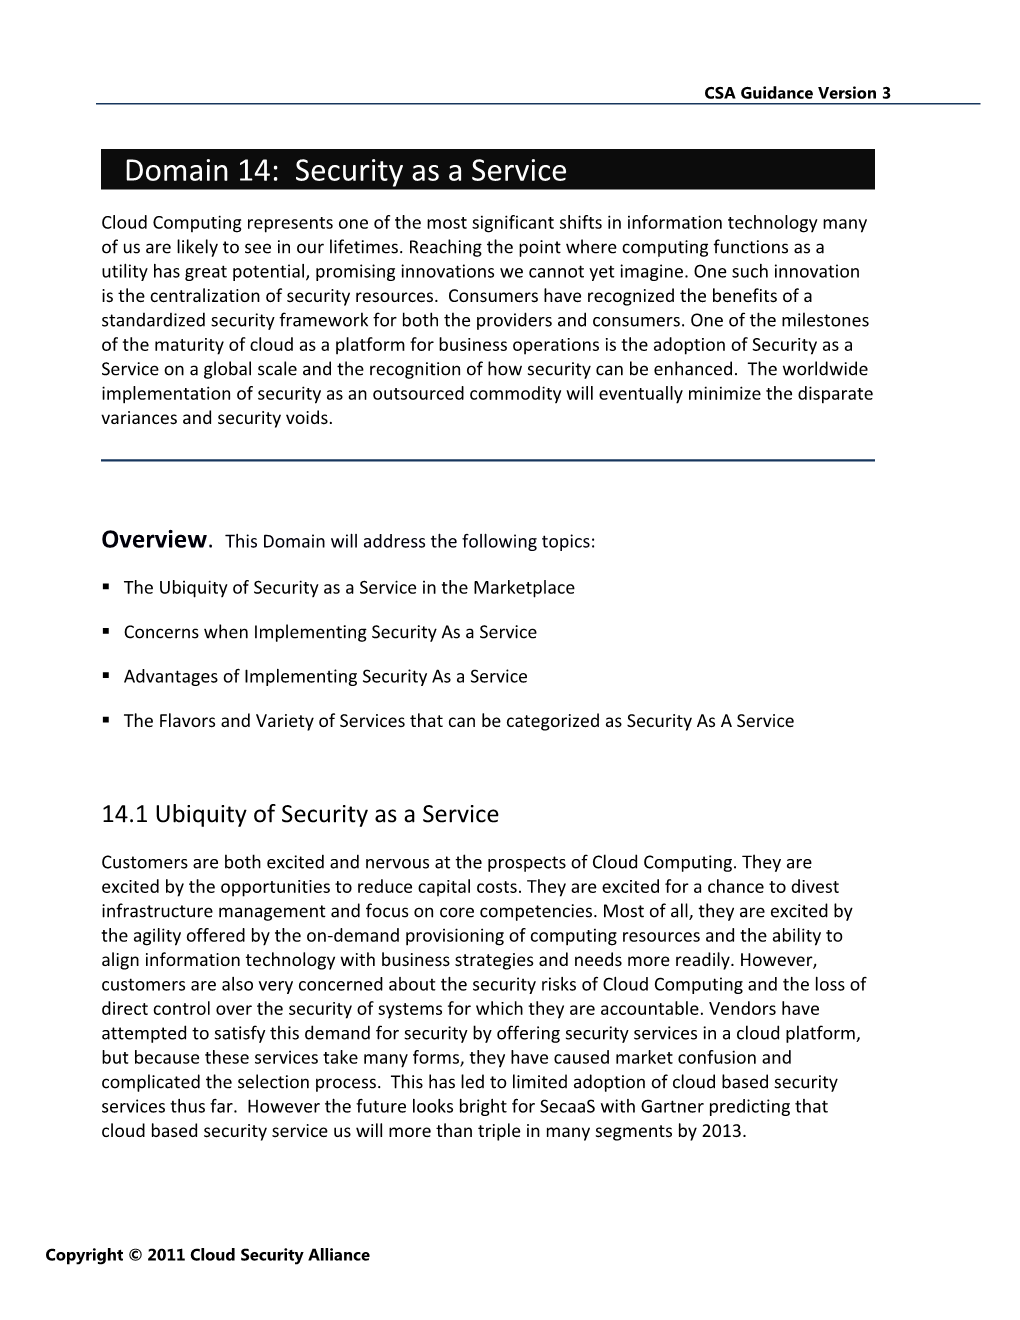 Domain 14: Security As a Service